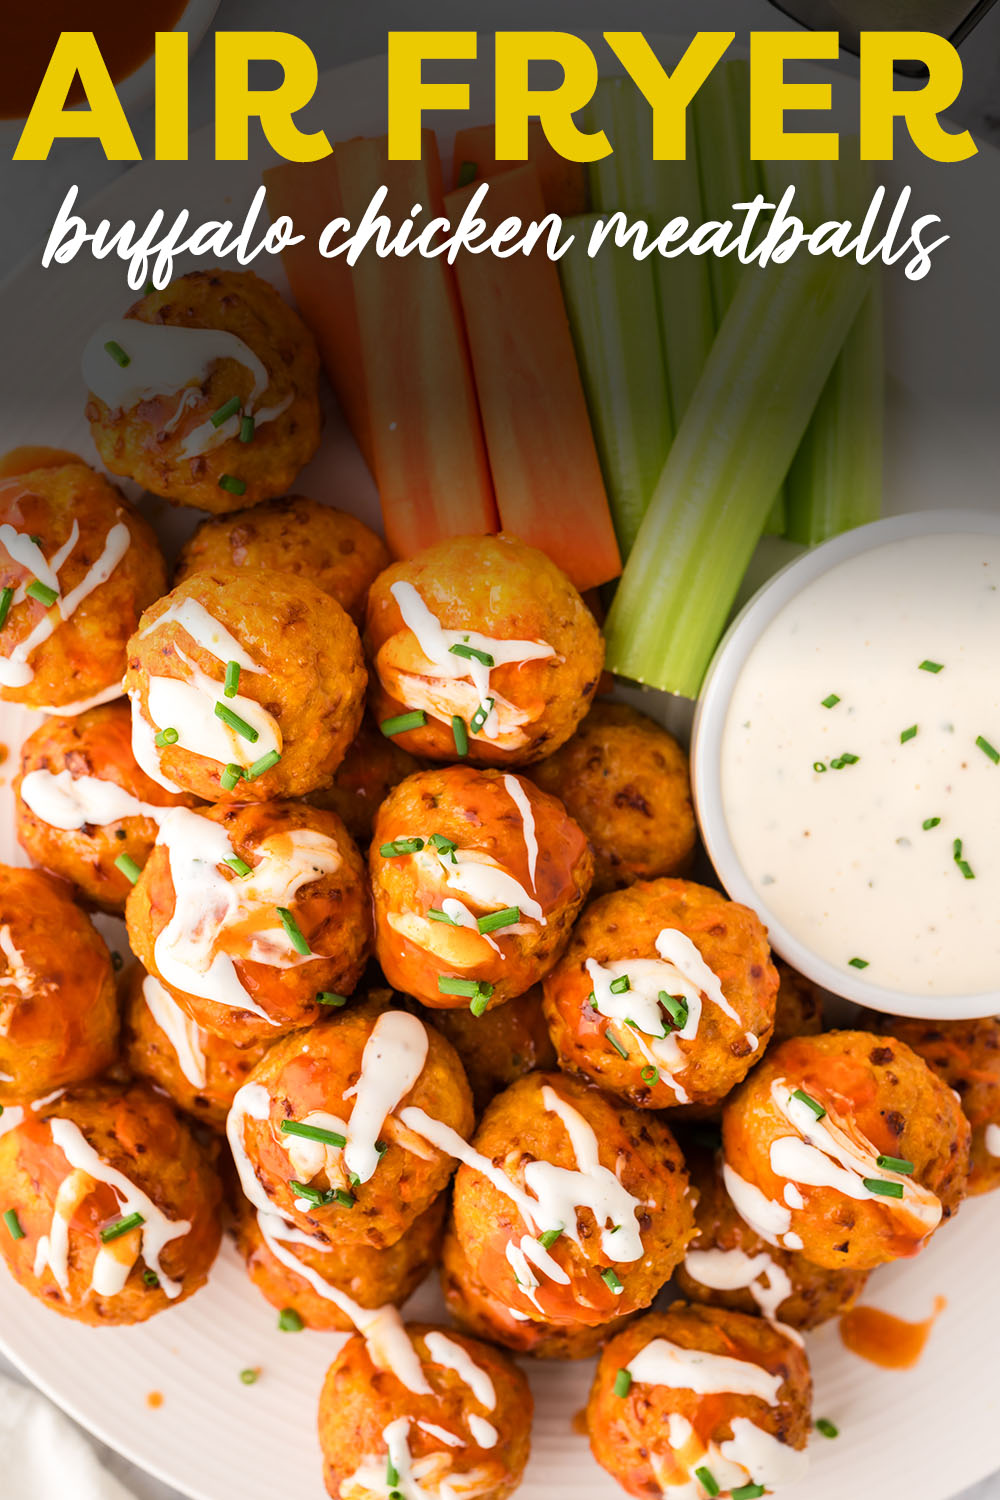 Buffalo chicken meatballs stacked up on top of each other on a plate.